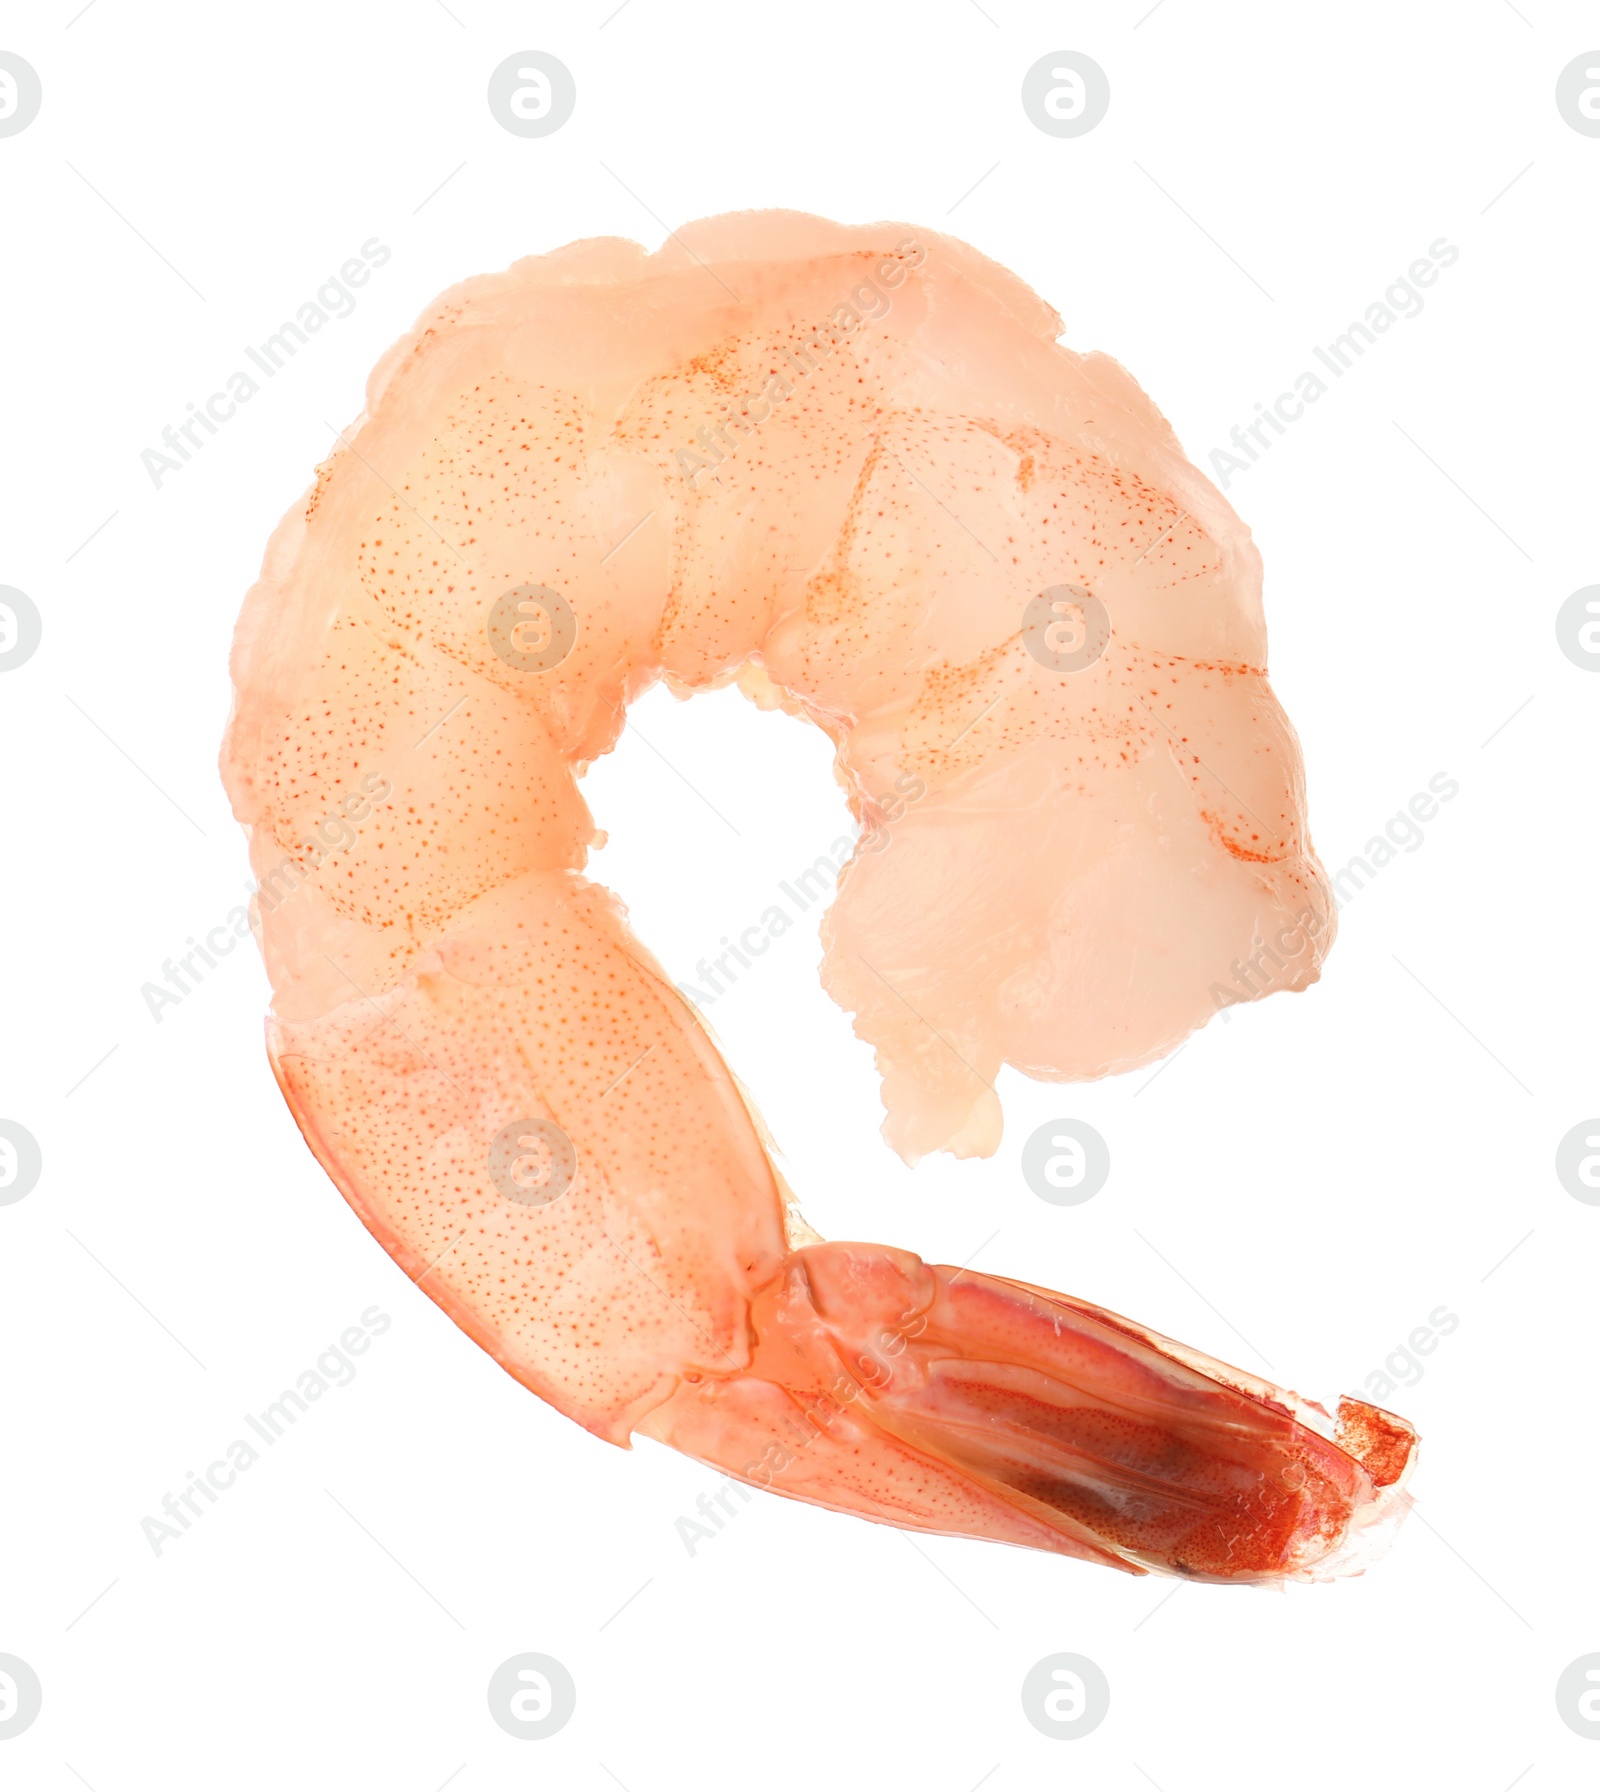 Photo of Freshly cooked delicious shrimp isolated on white